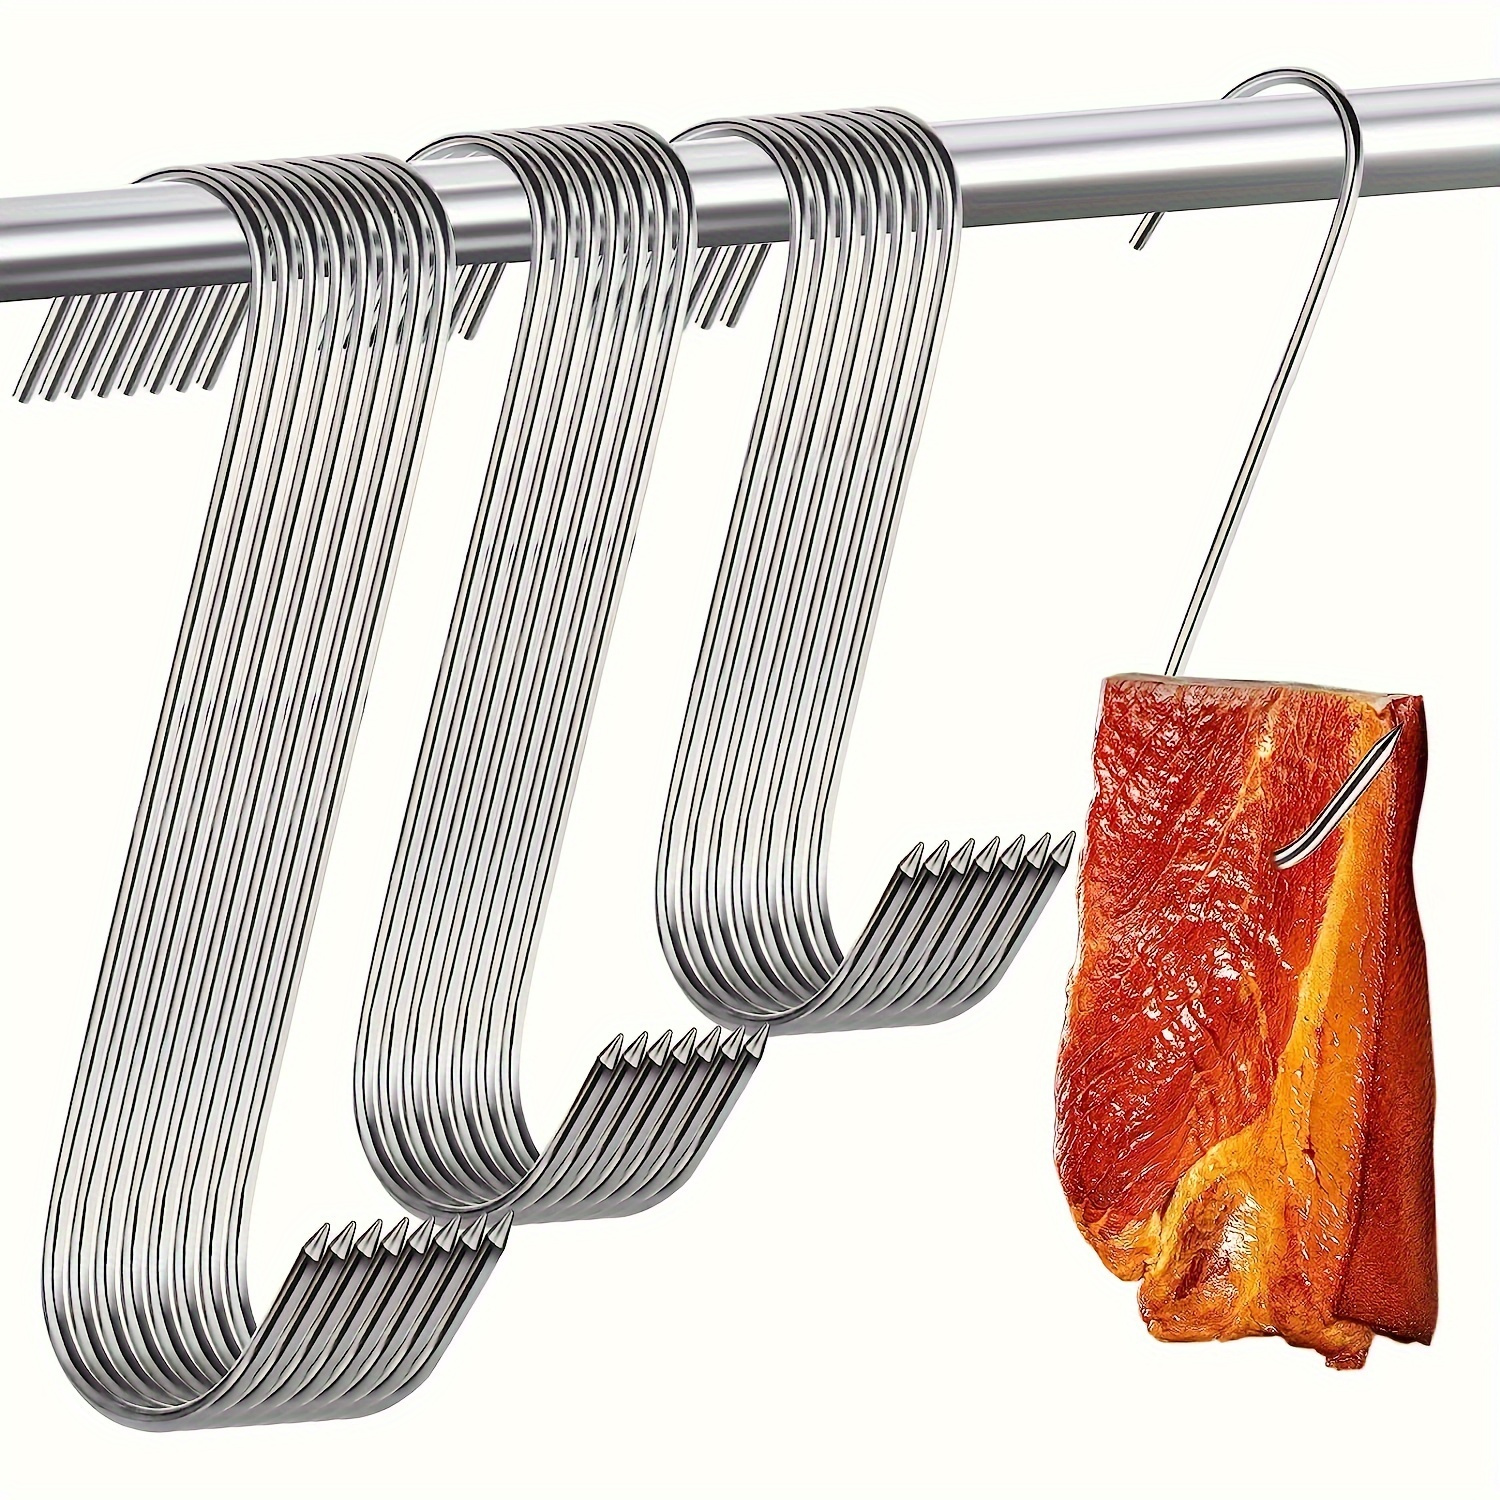 Stainless Steel Pork Hook S-shaped Heavy Duty Clothes Rack Bathroom Hooks  Decorative Ornament Meat 